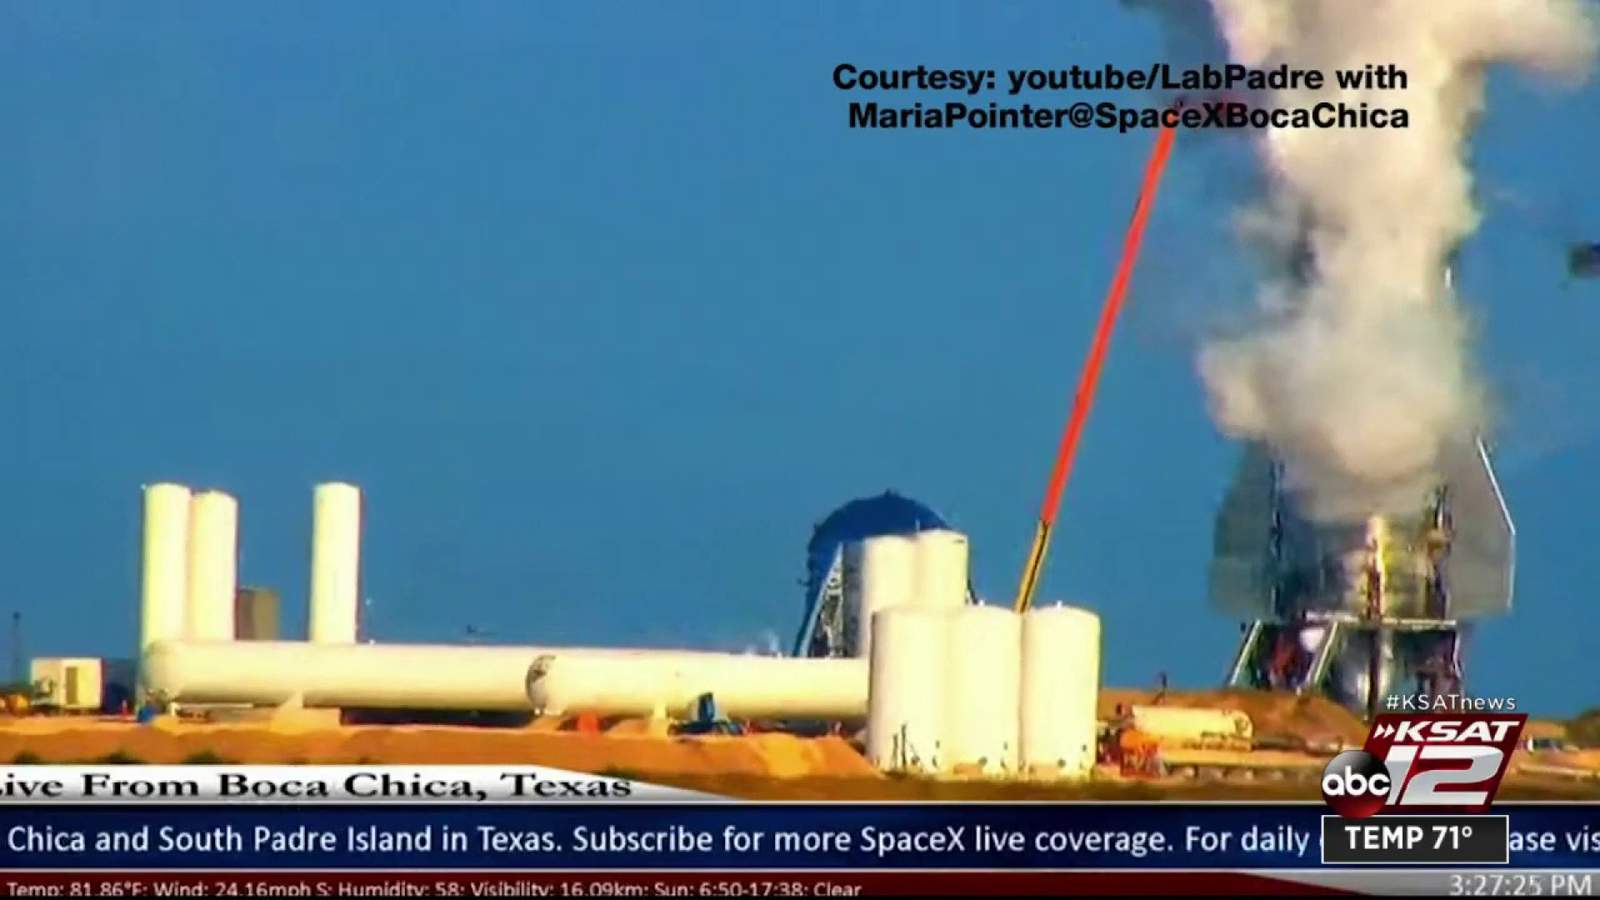 VIDEO: SpaceX MK-1 ship blows its top off